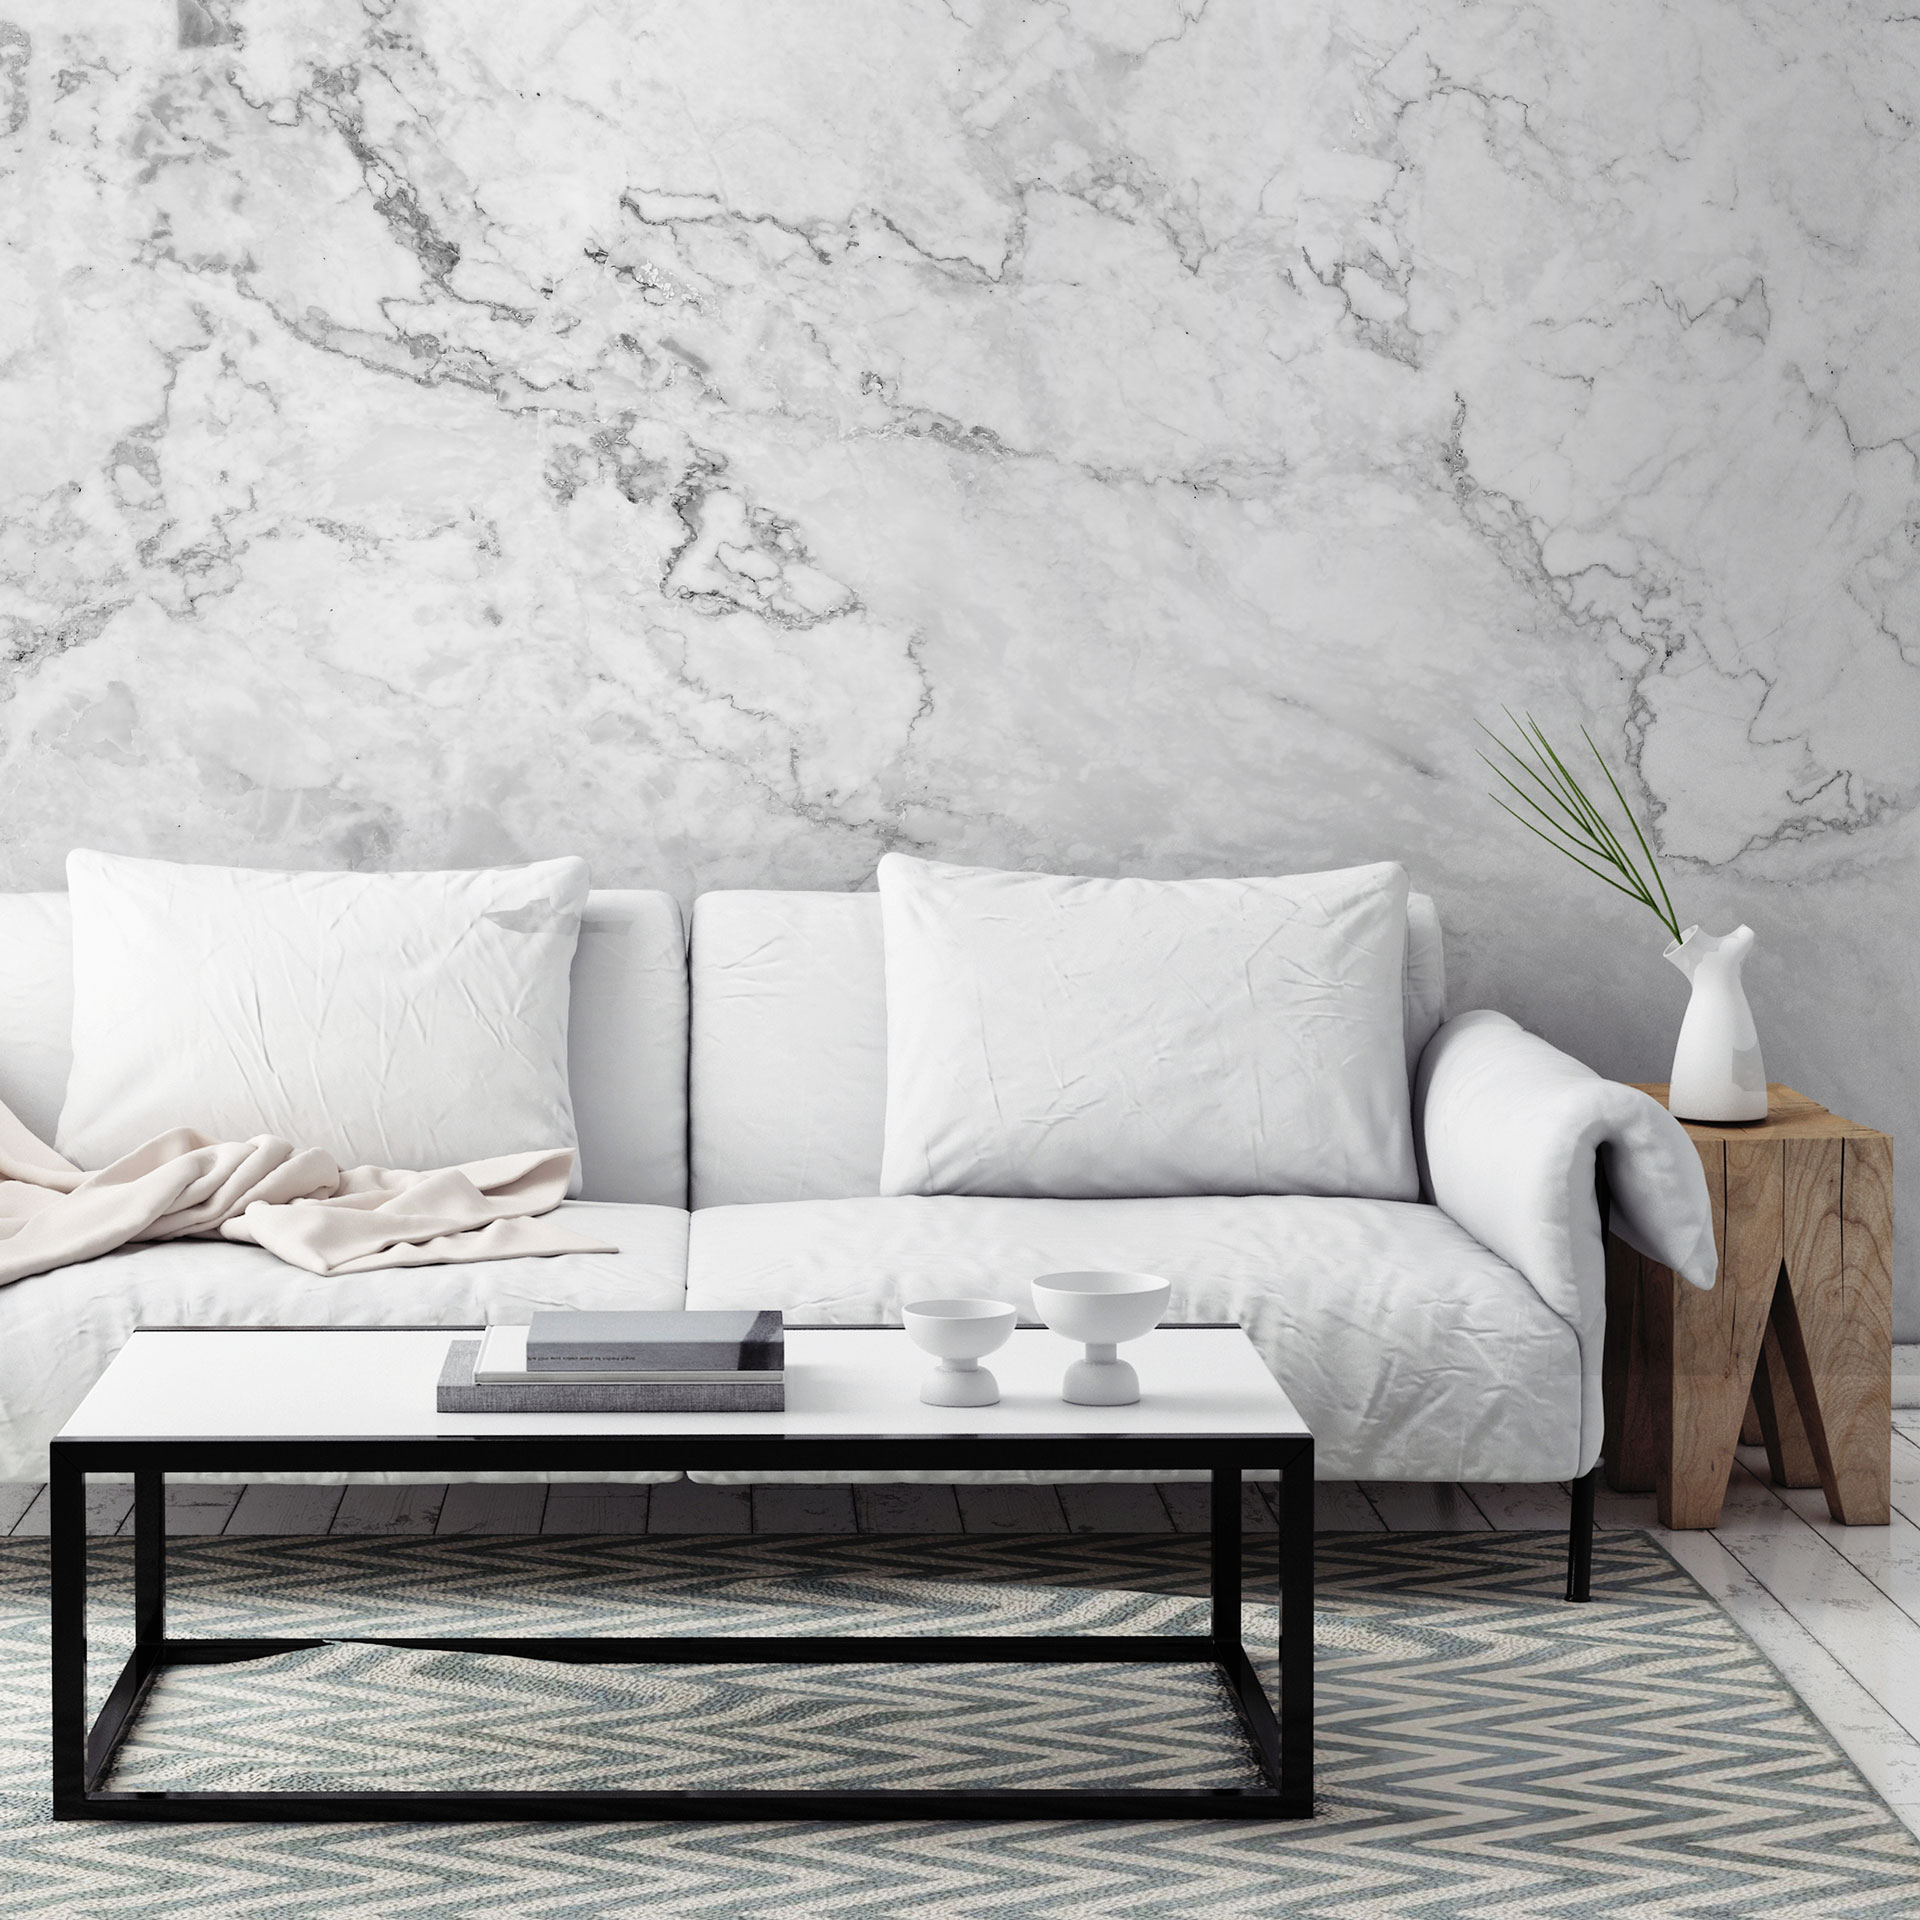 This Marble Mural will give a bold personality and a touch of elegance to any wall at a fraction of the cost of real marble.